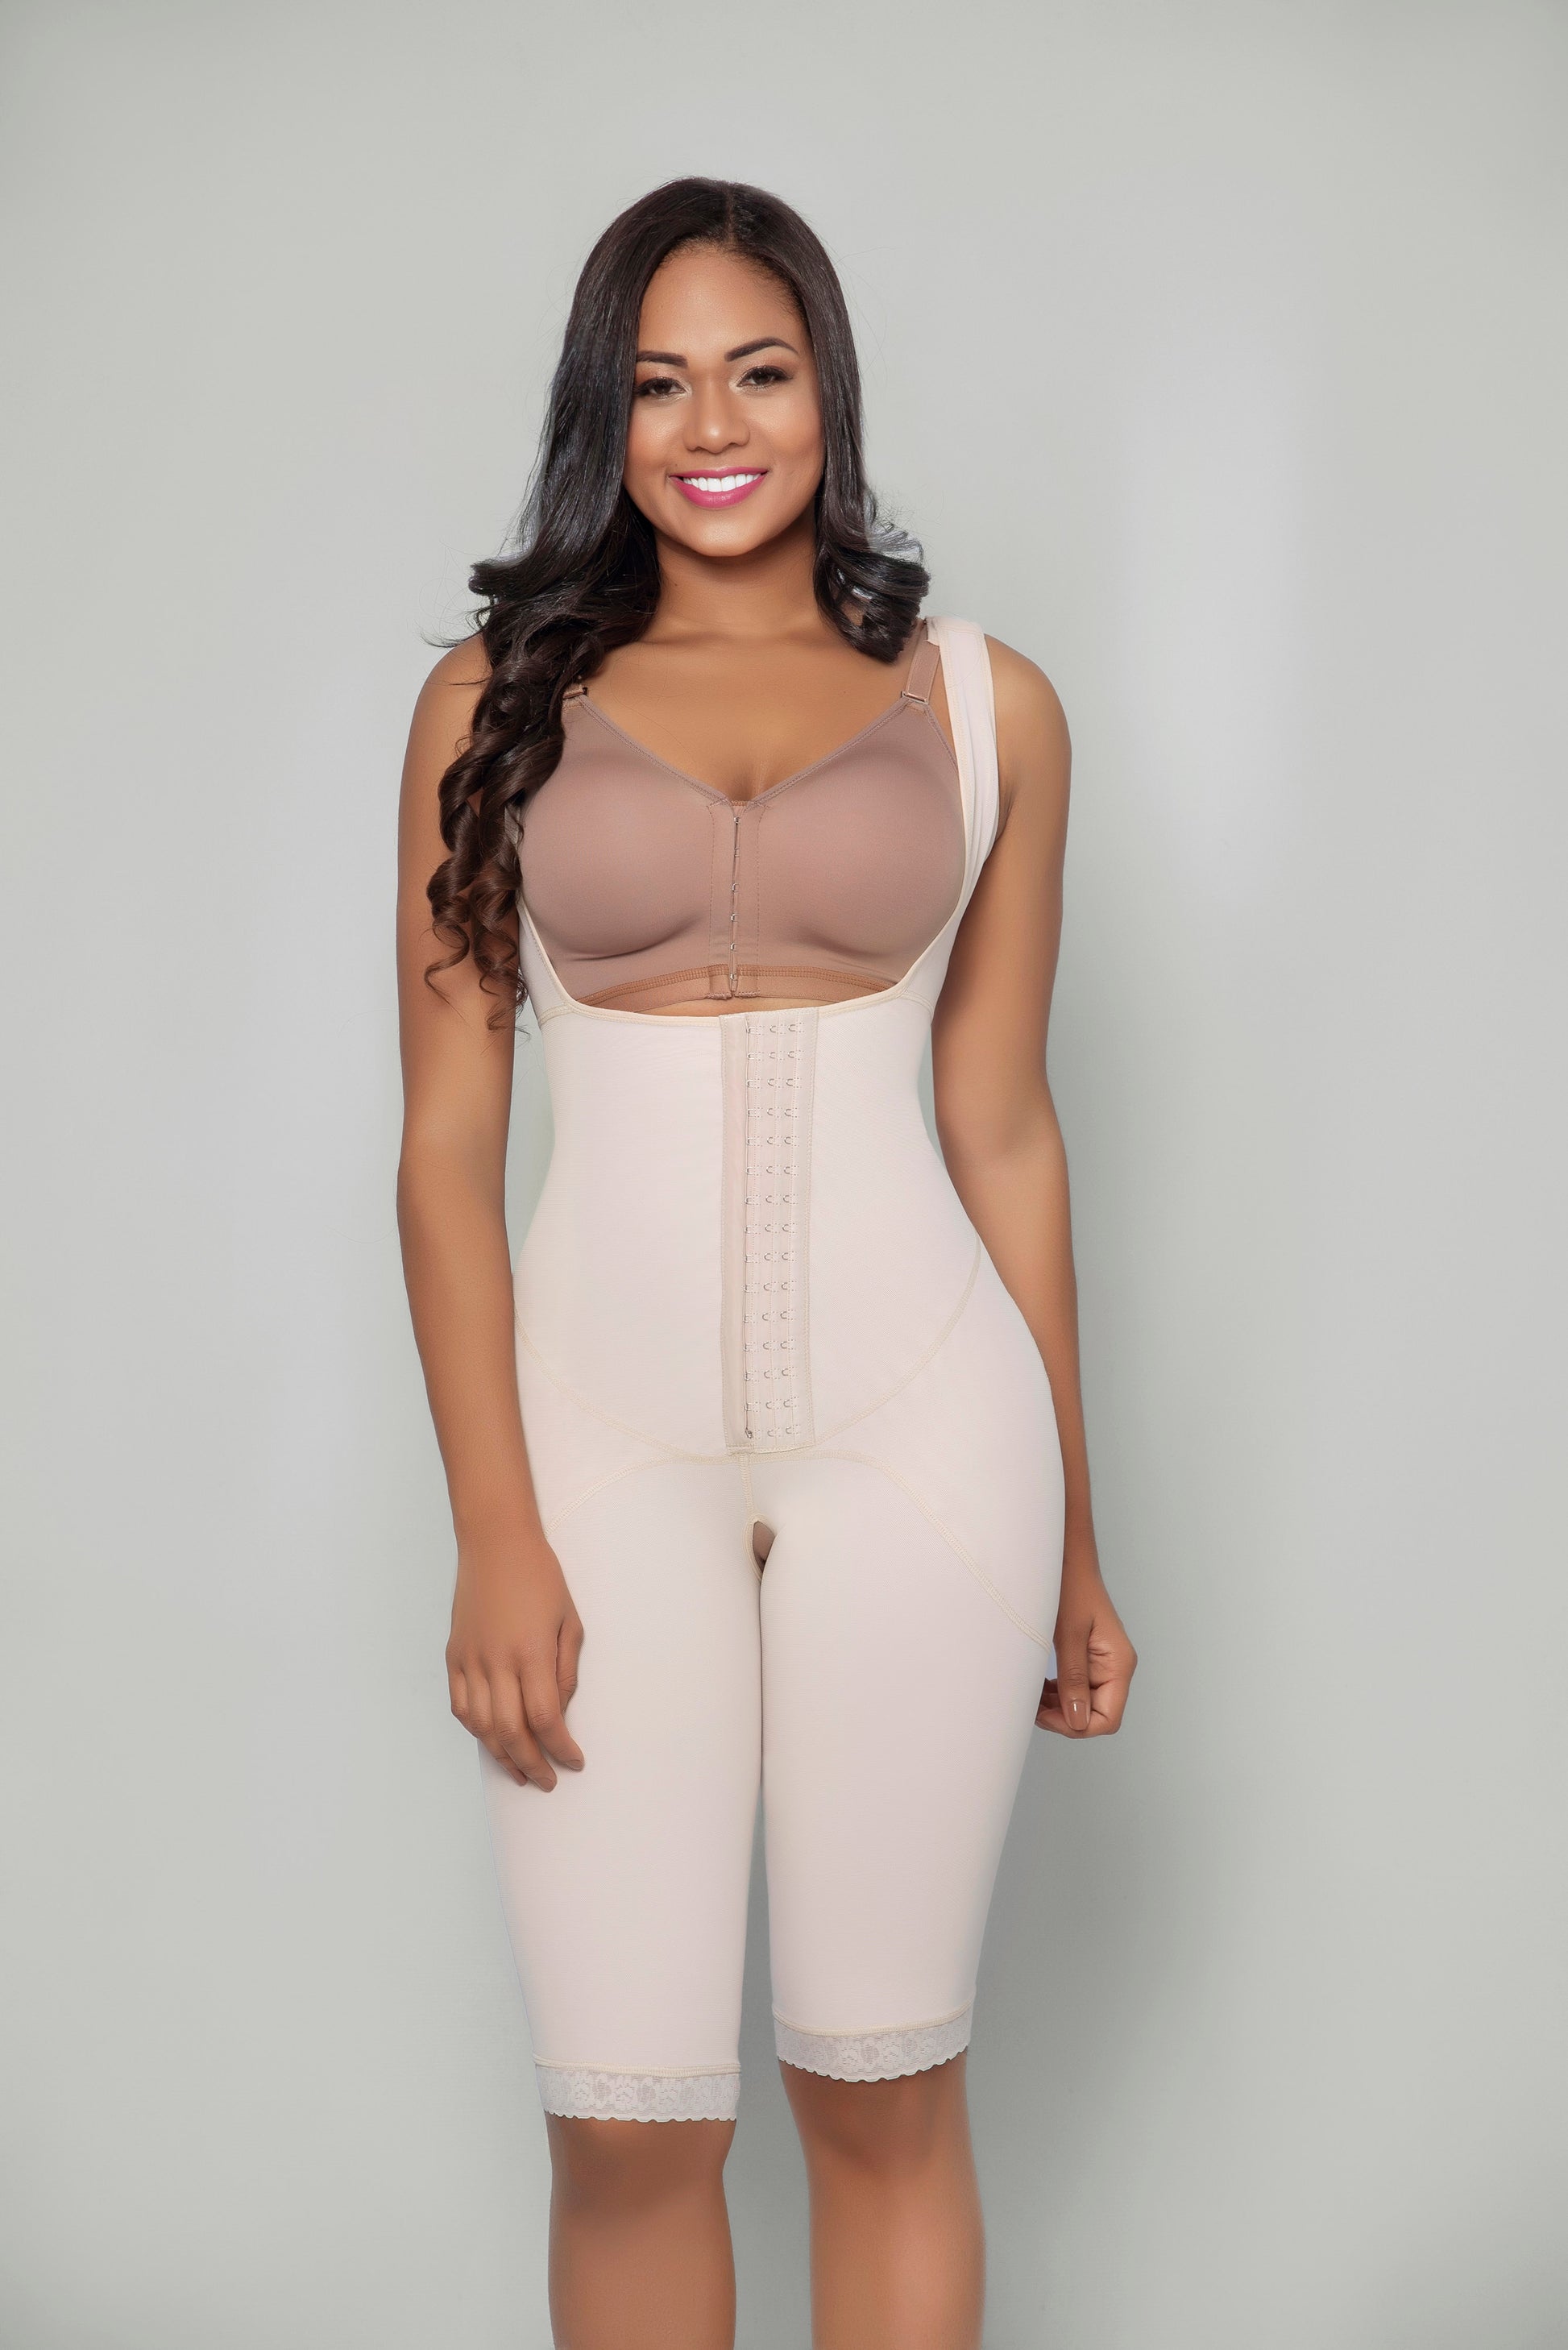 Braless full body above knee faja with sleeves - Contour Fajas